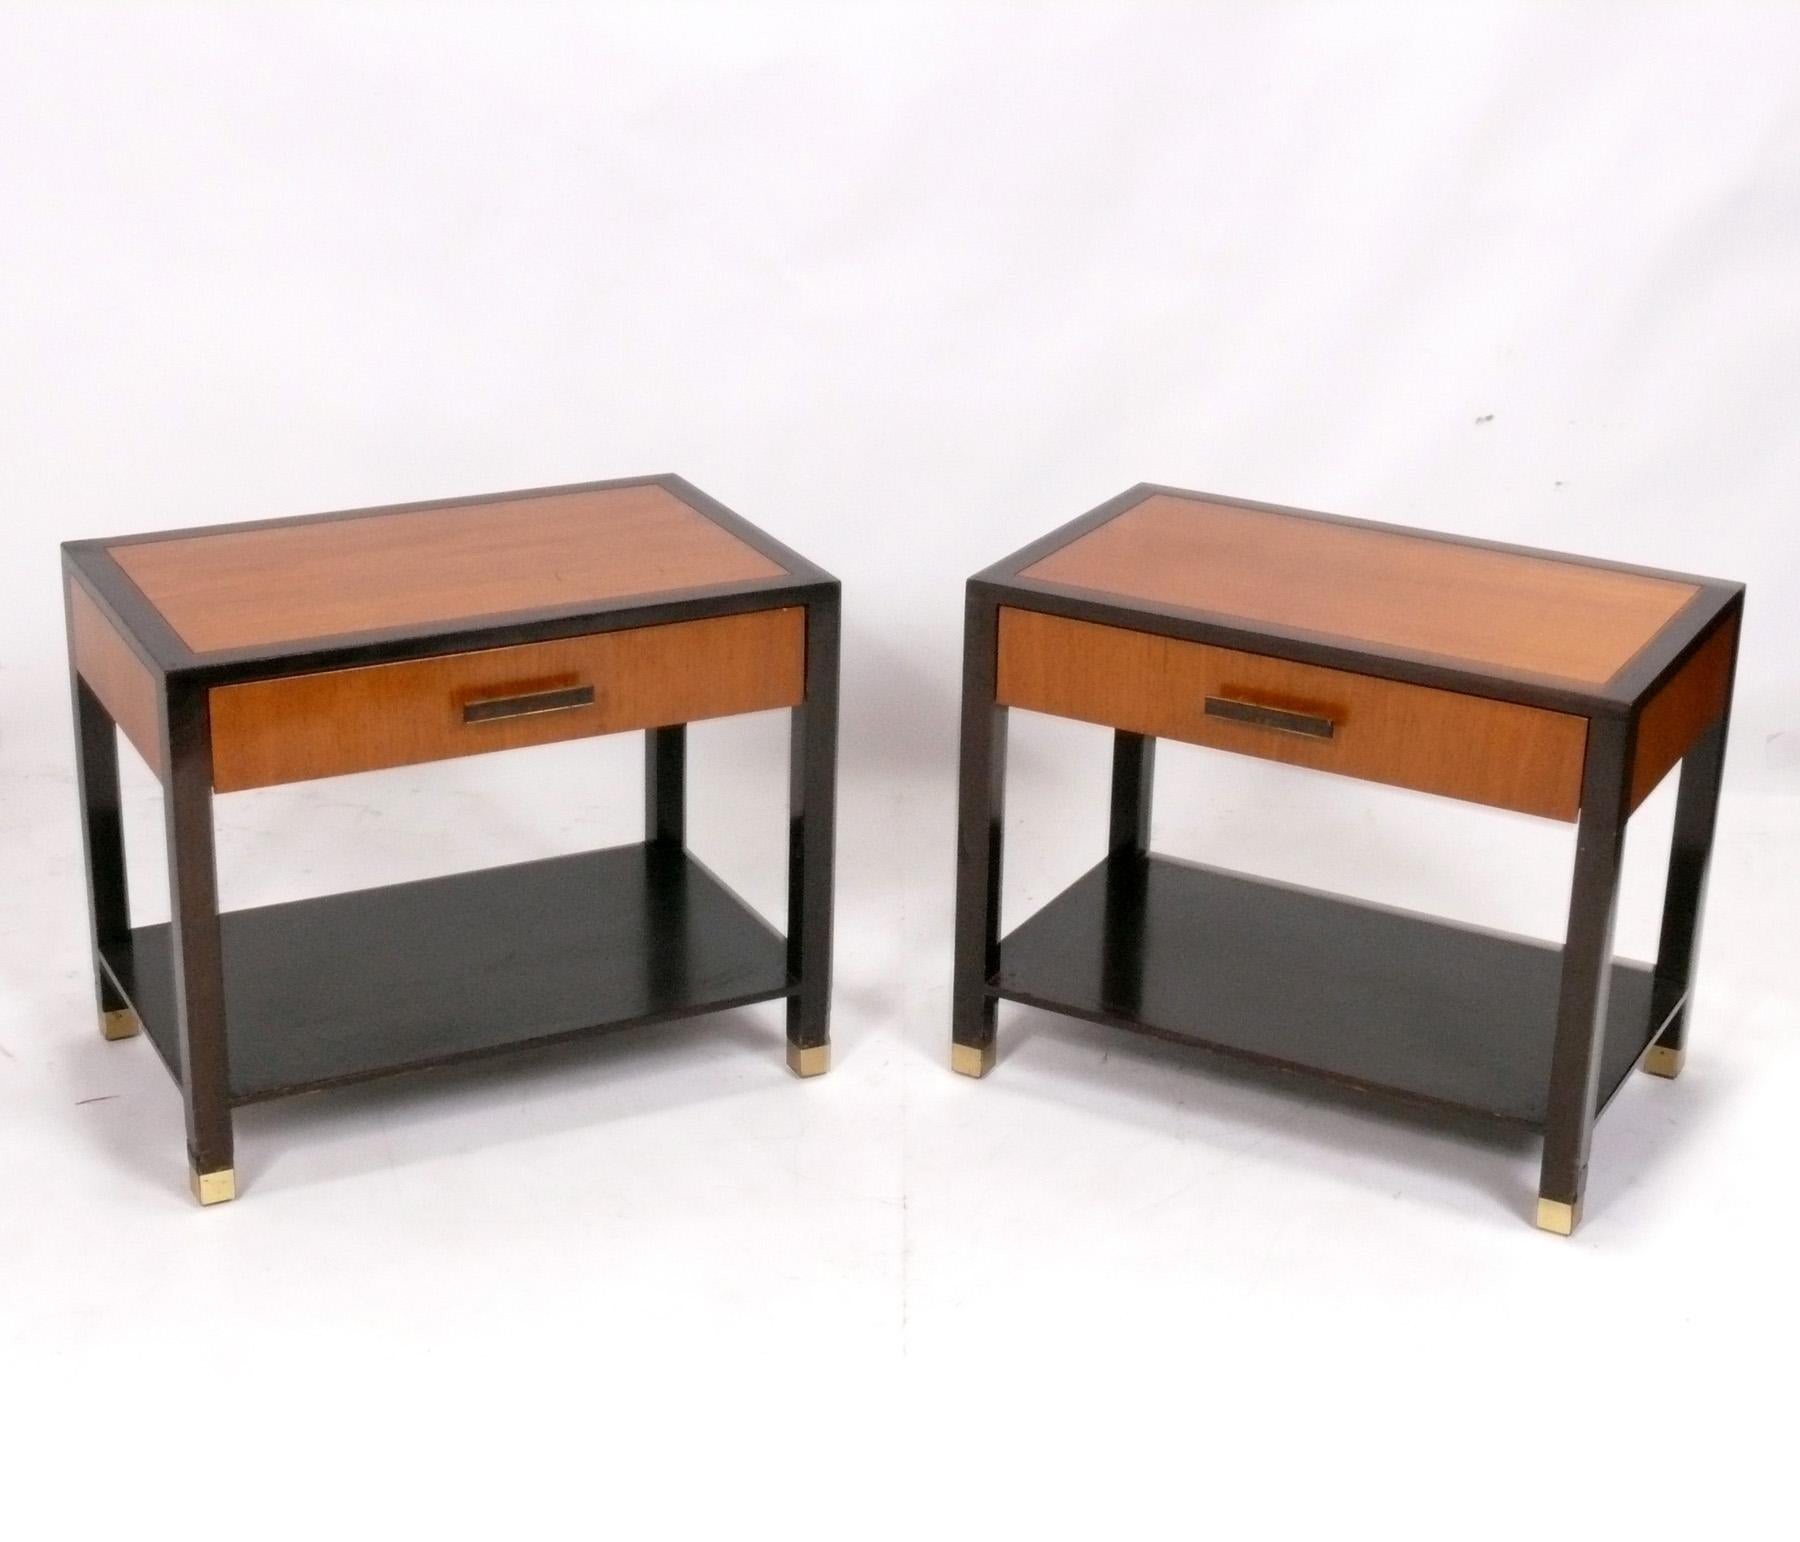 Pair of Elegant Clean Lined Nightstands or Side Tables, designed by Harvey Probber, American, circa 1960s. Signed inside one of the drawers, see last photo. These tables are currently being refinished and will look incredible when completed. They